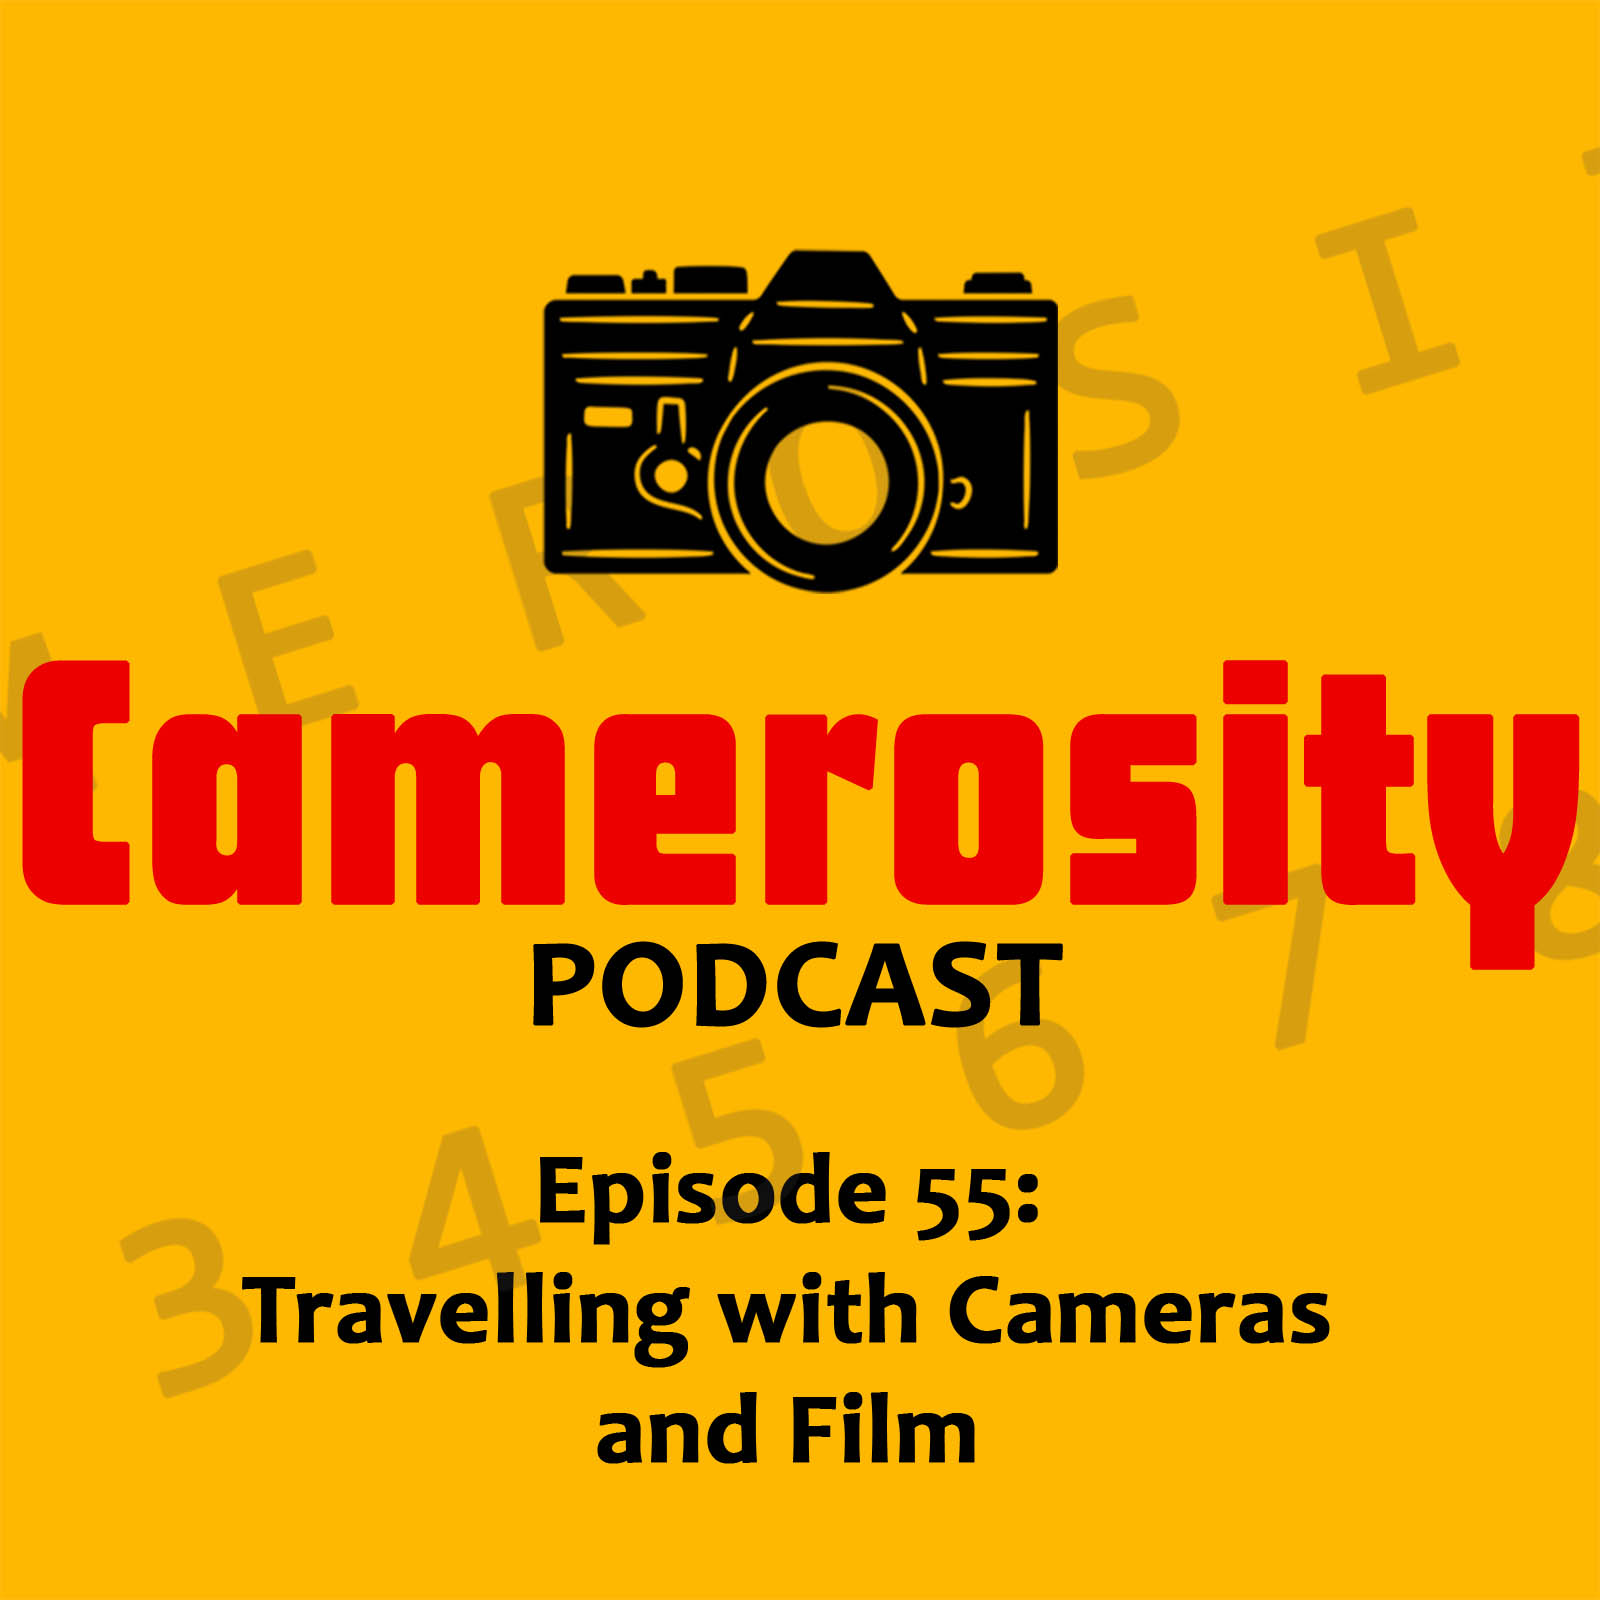 Episode 55: Travelling With Cameras and Film